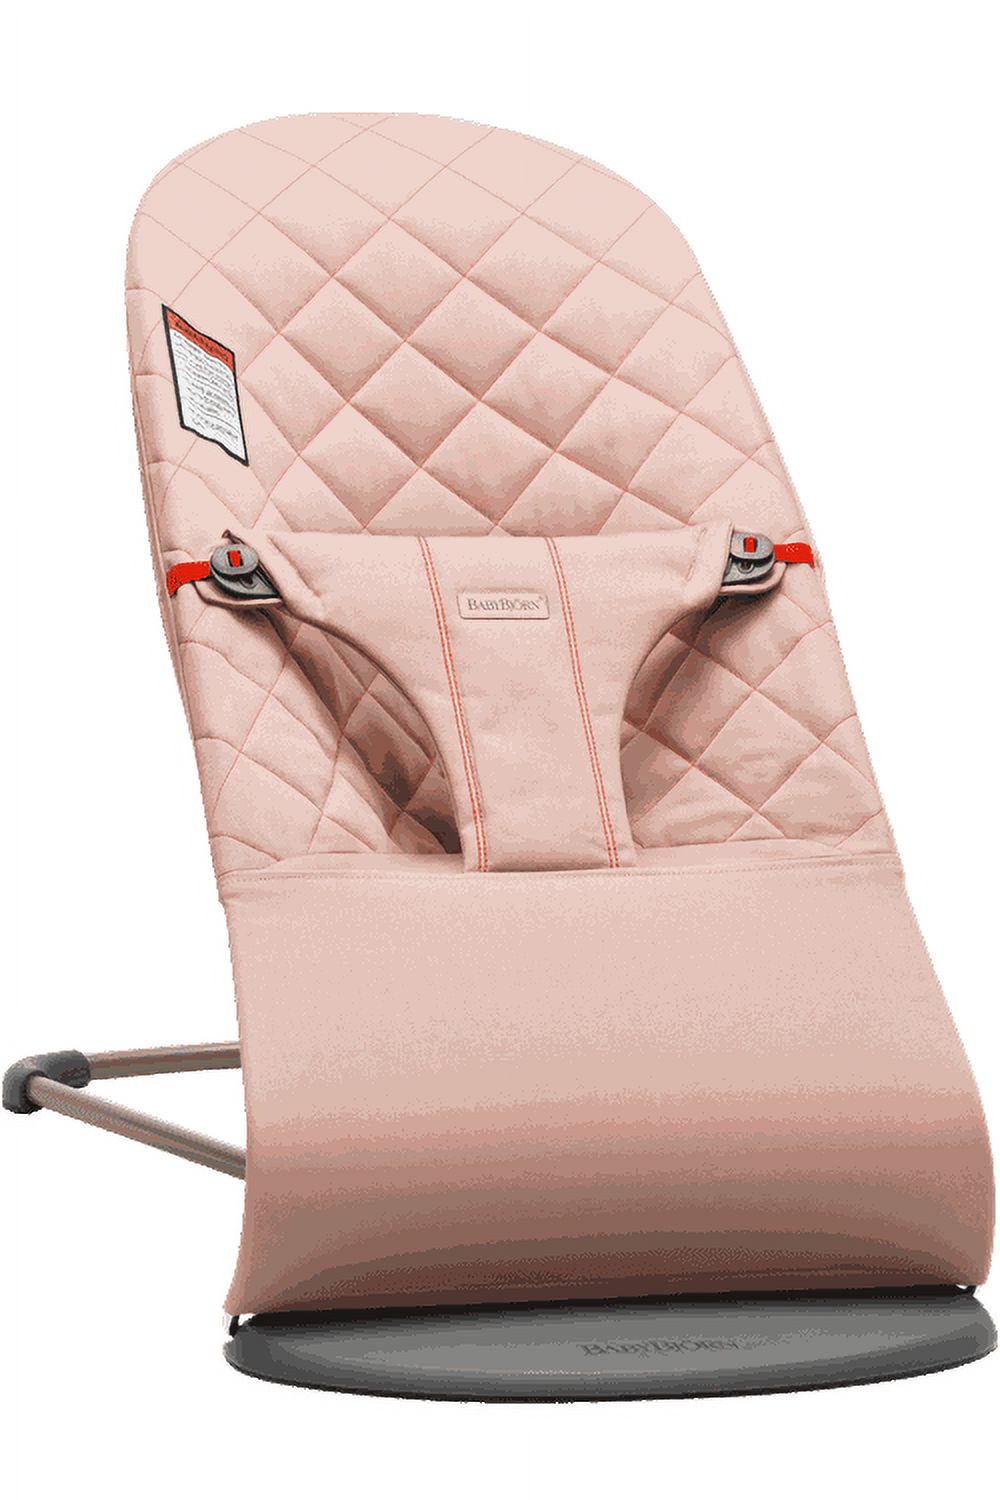 BabyBjorn Bouncer Bliss, Dark Gray Frame, Cotton, Classic Quilt, Dusty Pink - image 1 of 9